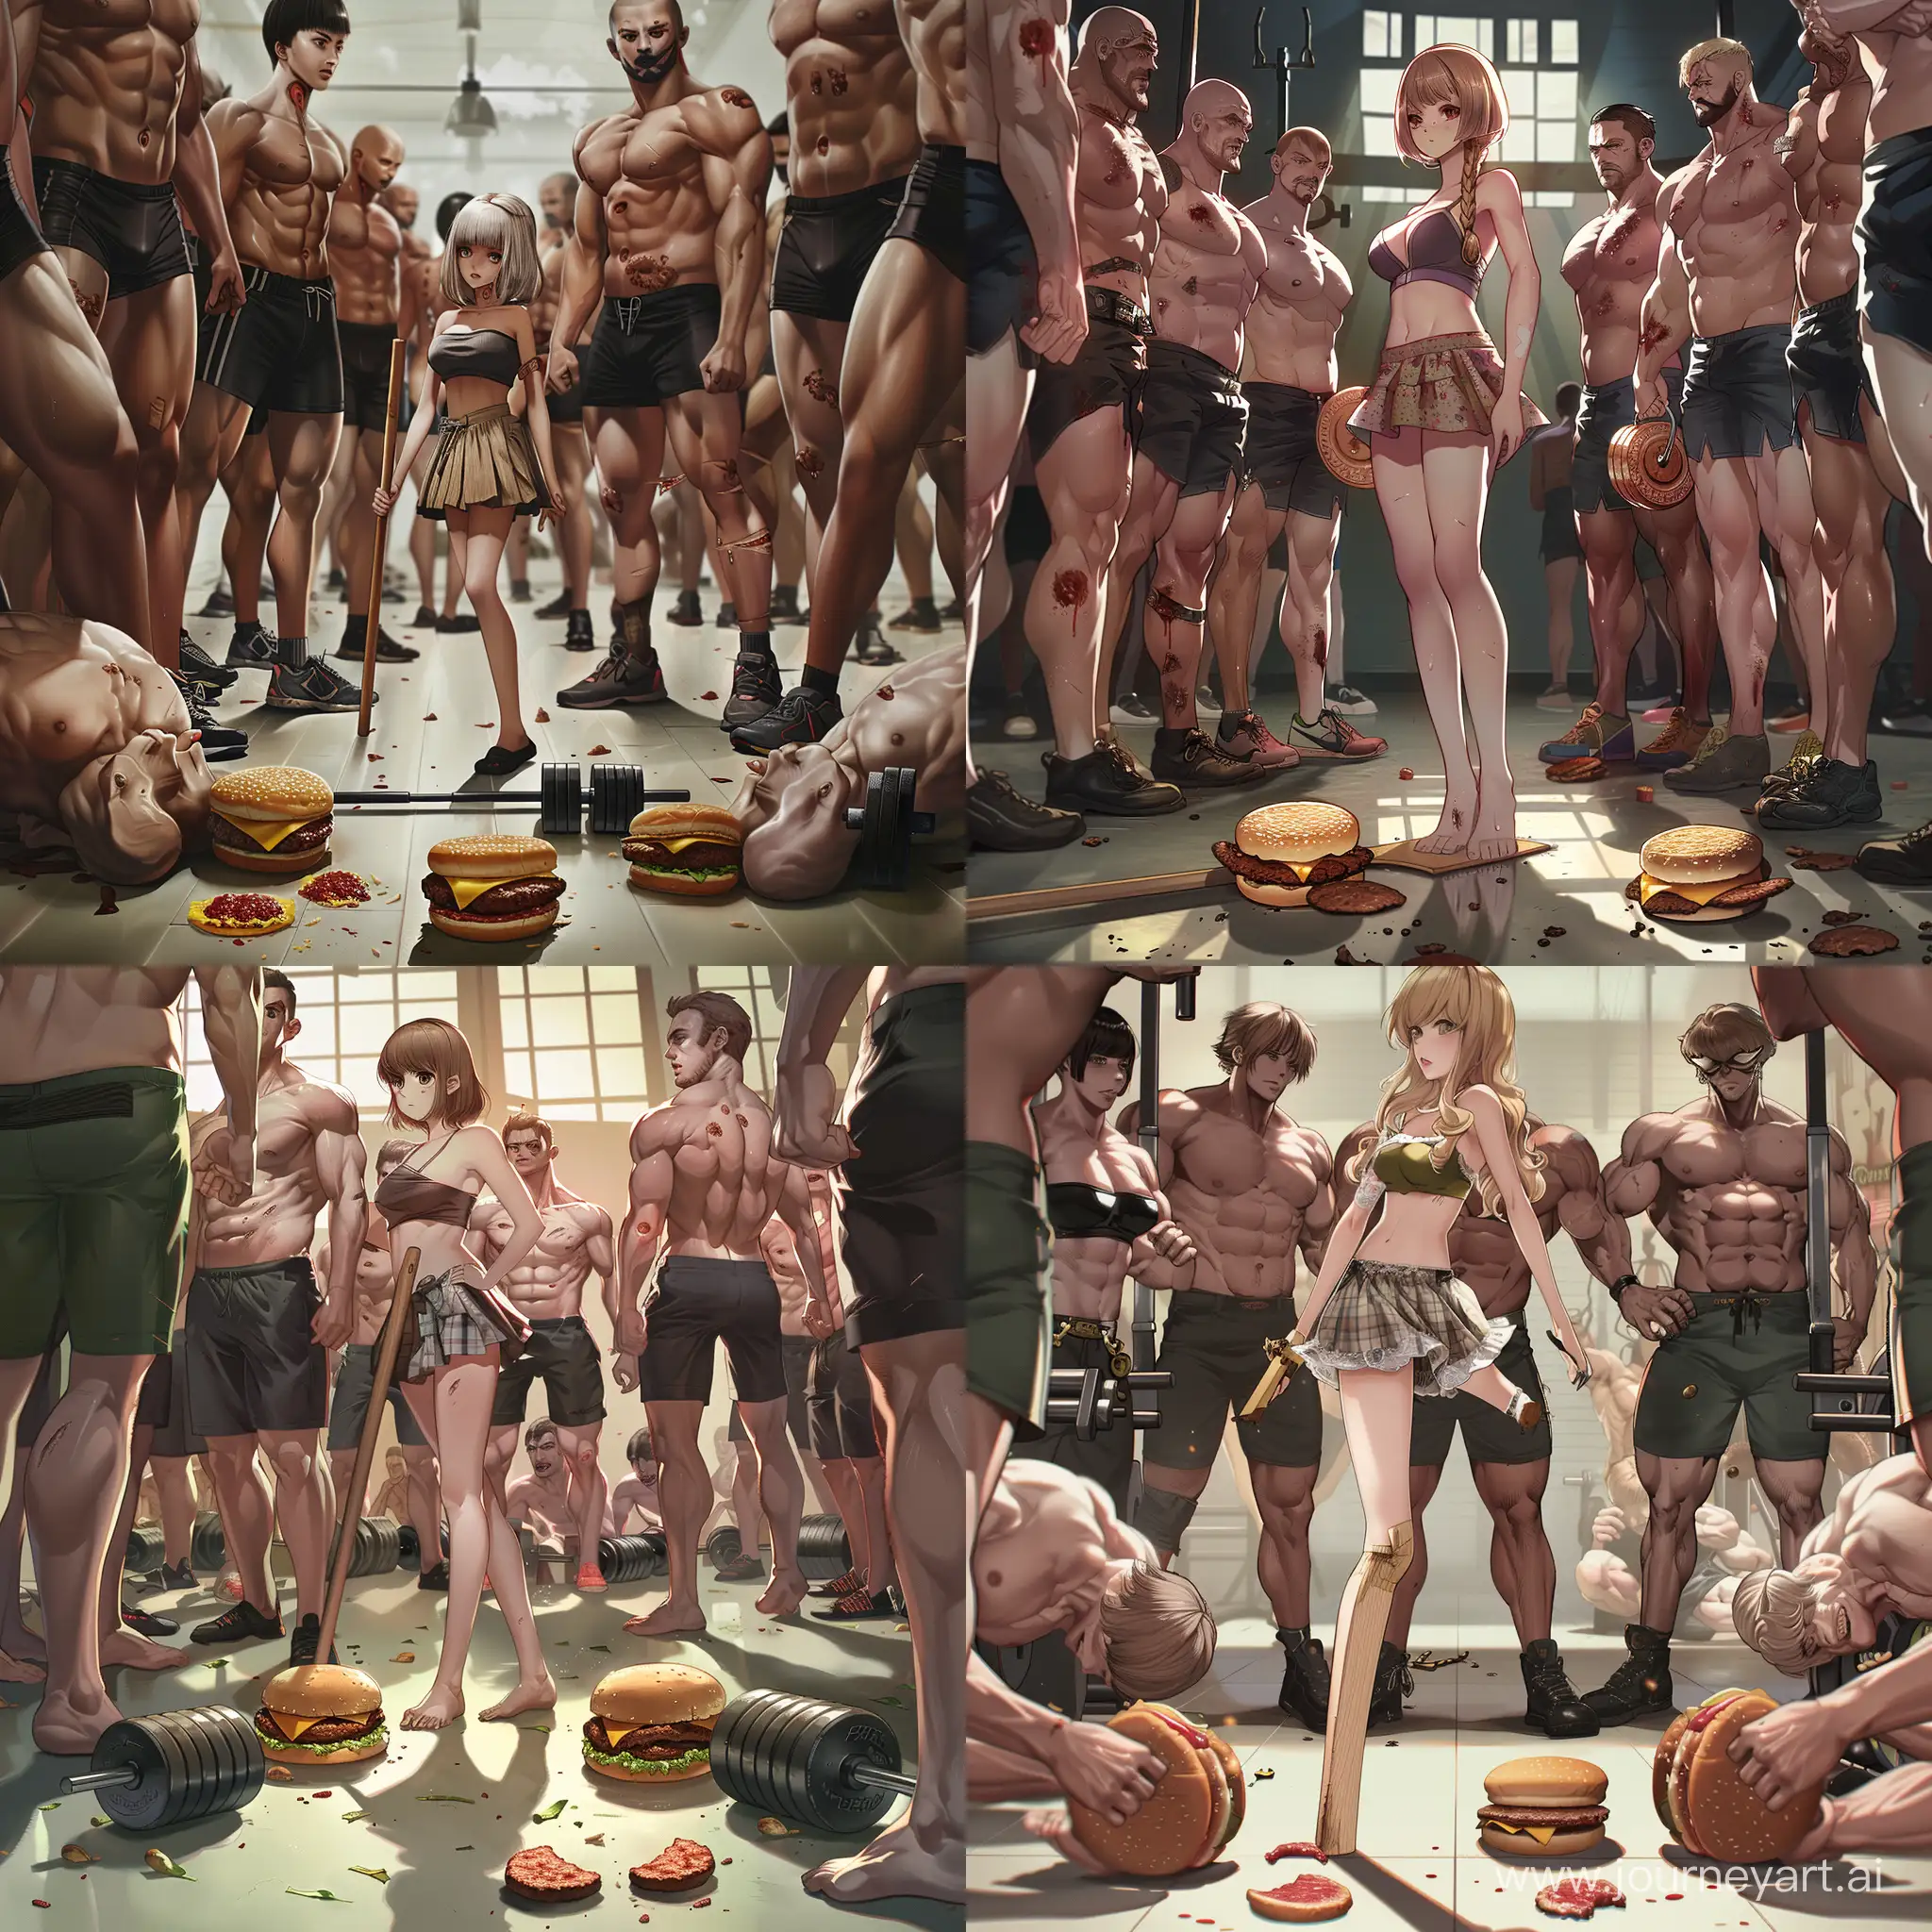 Anime-Girl-with-Wooden-Leg-Surrounded-by-Bodybuilders-and-Burgers